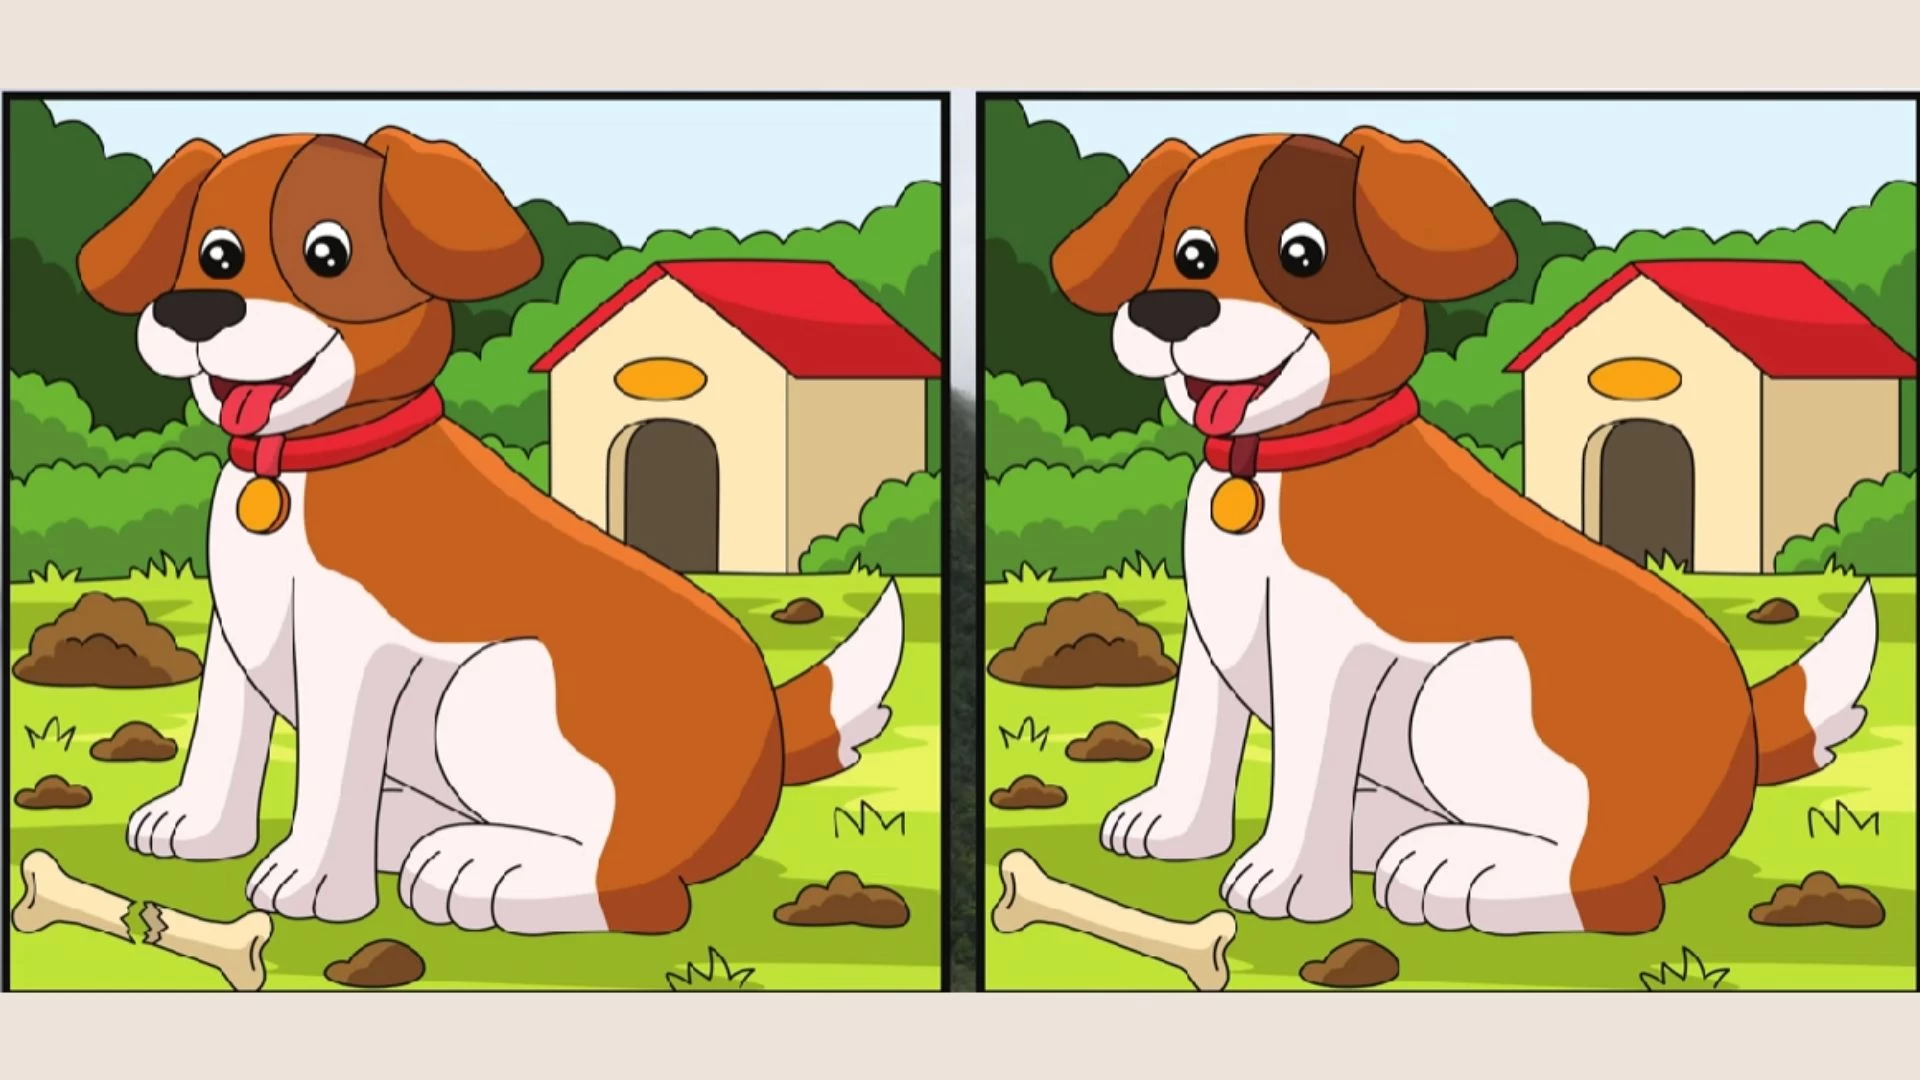 Only the most observant can spot 5 differences between the dog pictures in 16 seconds.